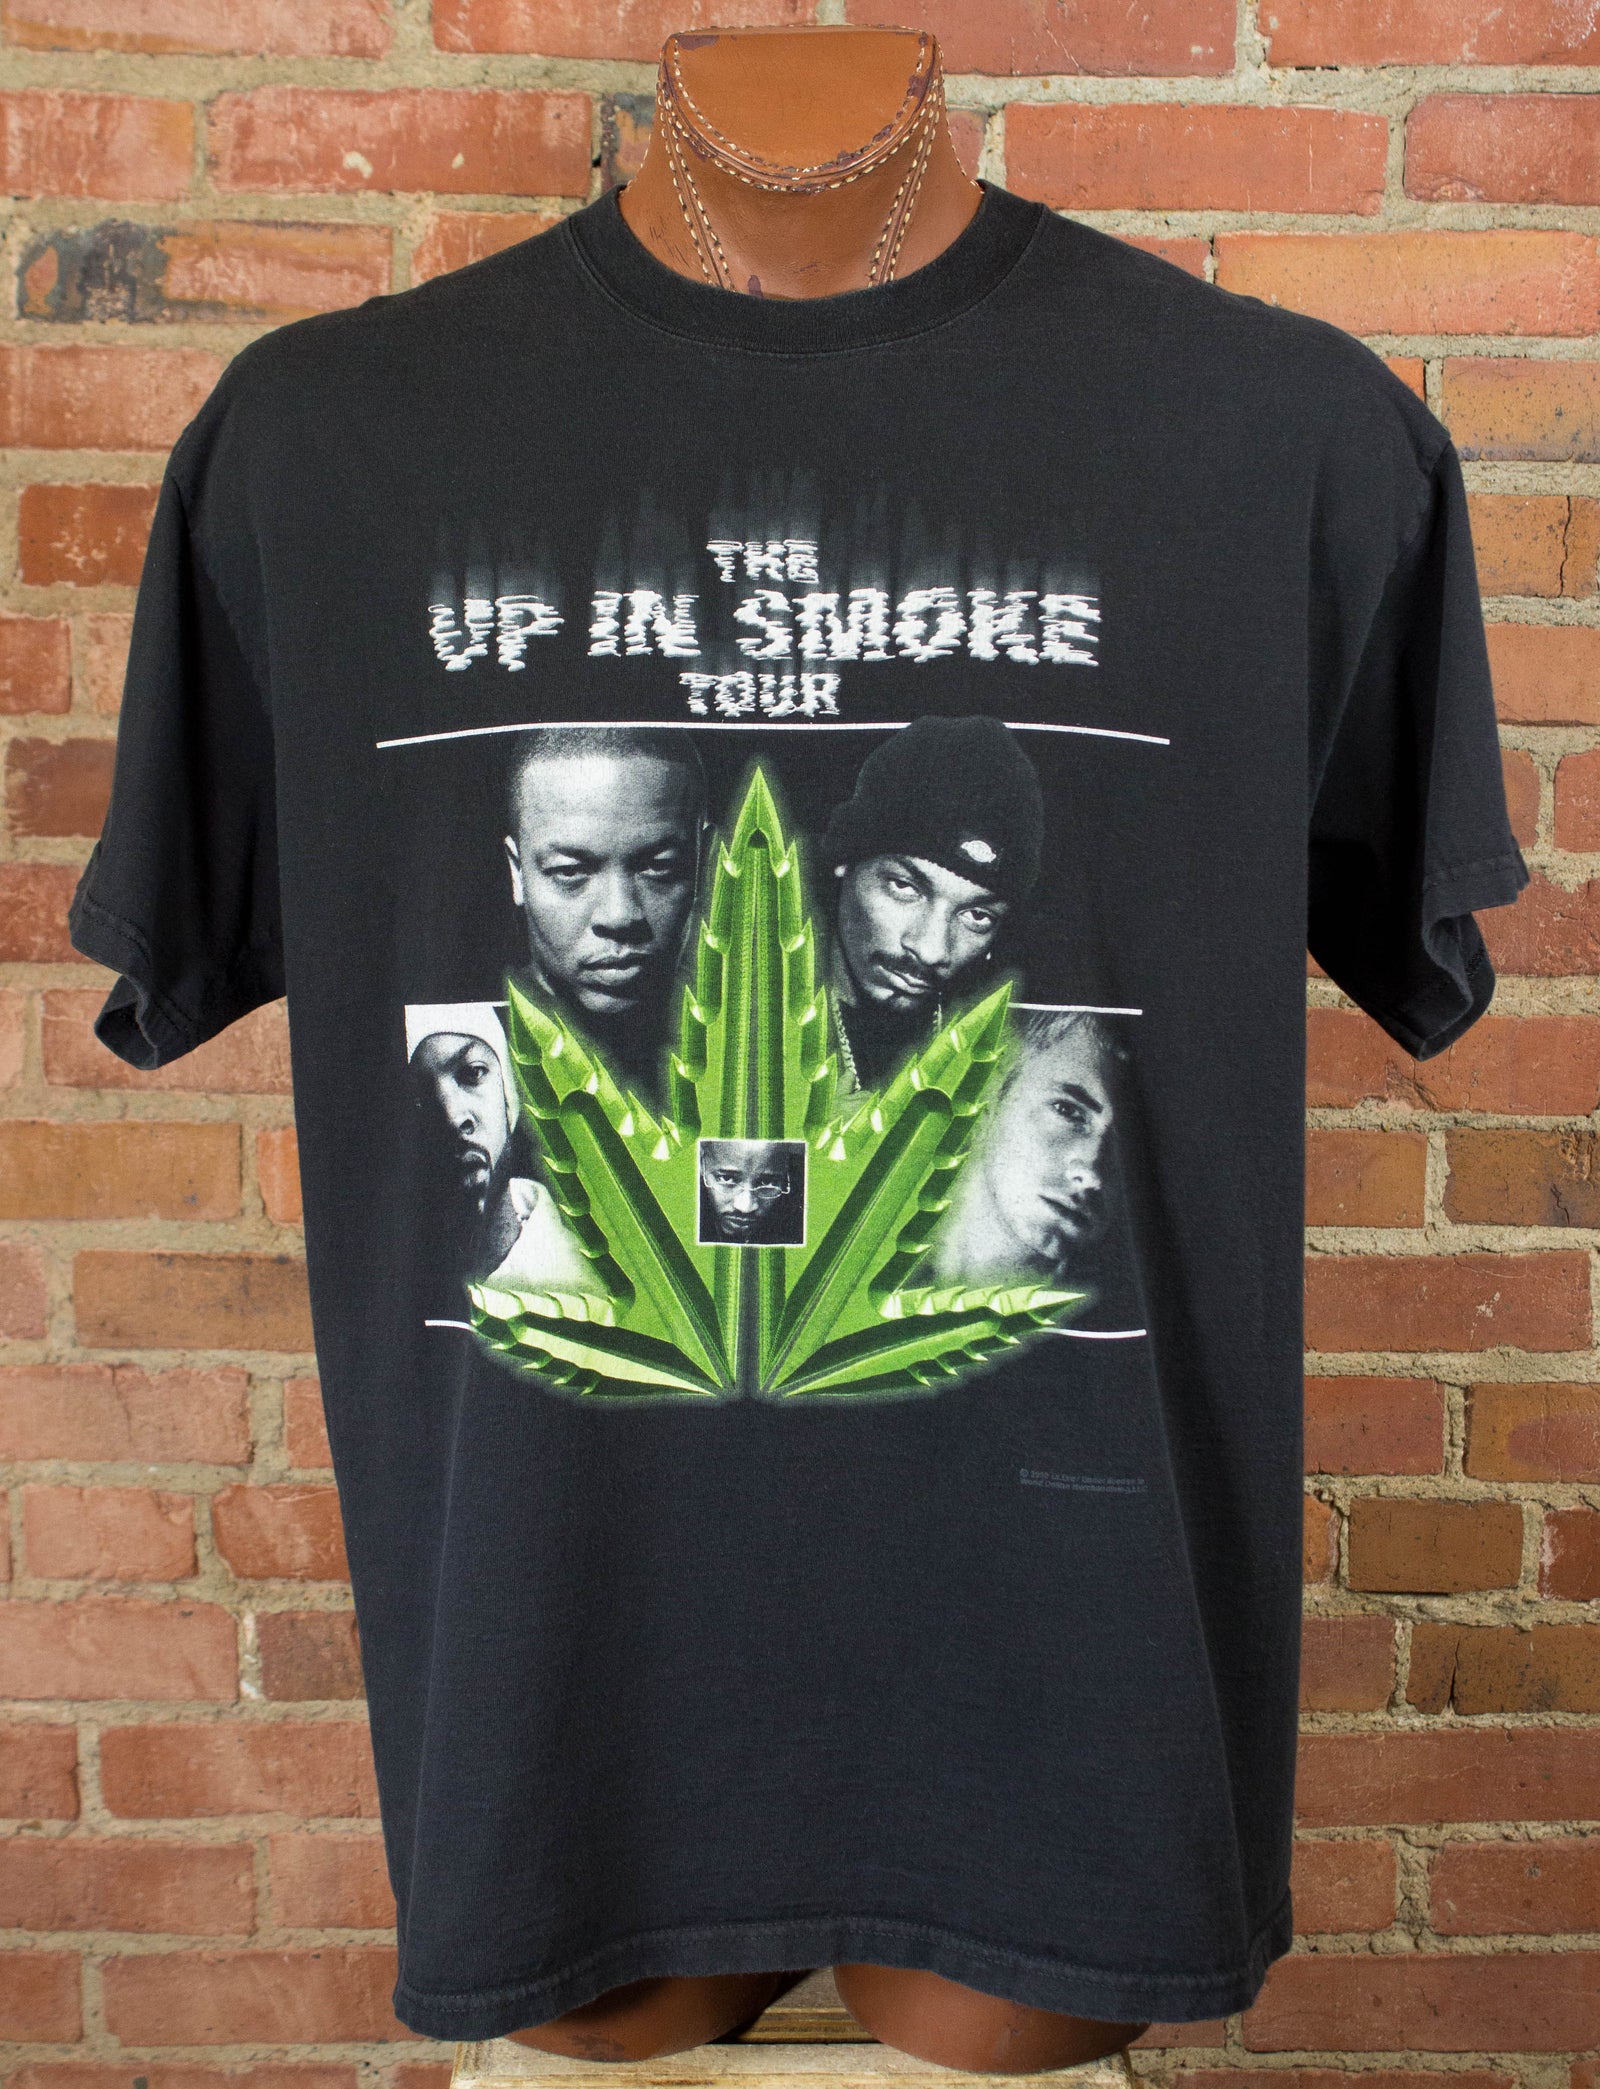 rap tee RockTシャツ UP IN SMOKE TOUR Tシャツ | nate-hospital.com